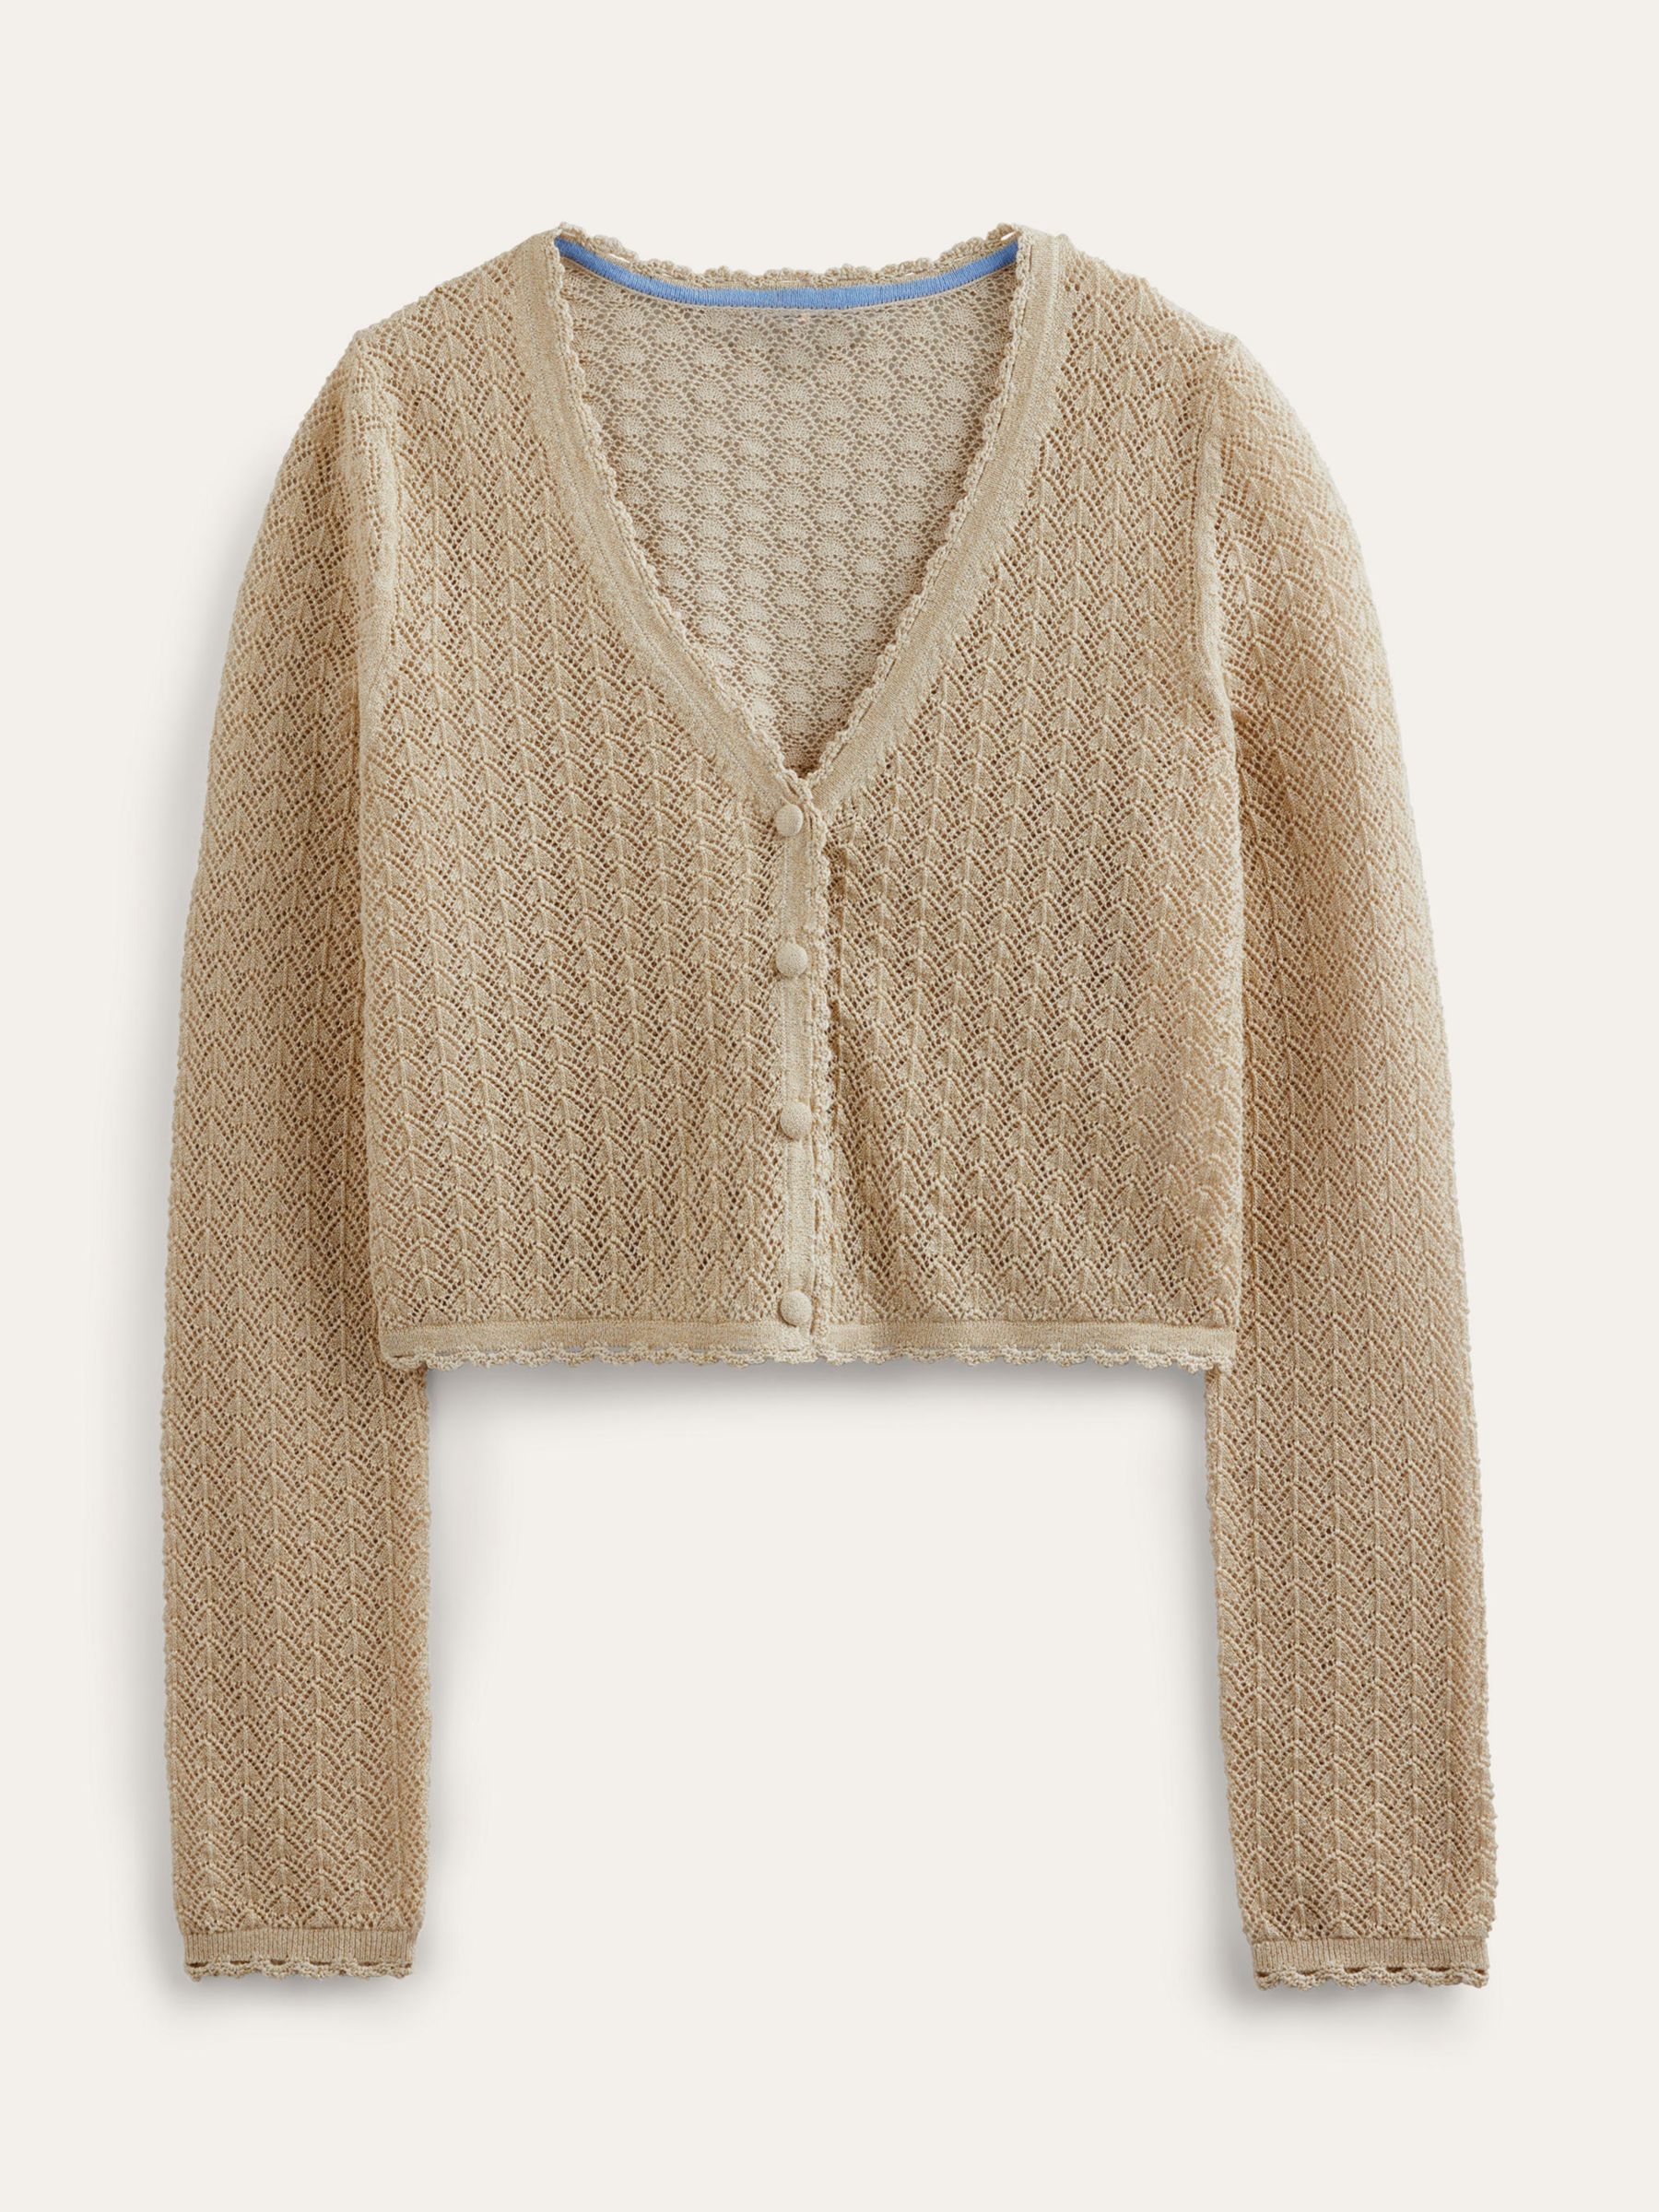 Boden Pointelle Cropped Cardigan, Gold Sparkle at John Lewis & Partners